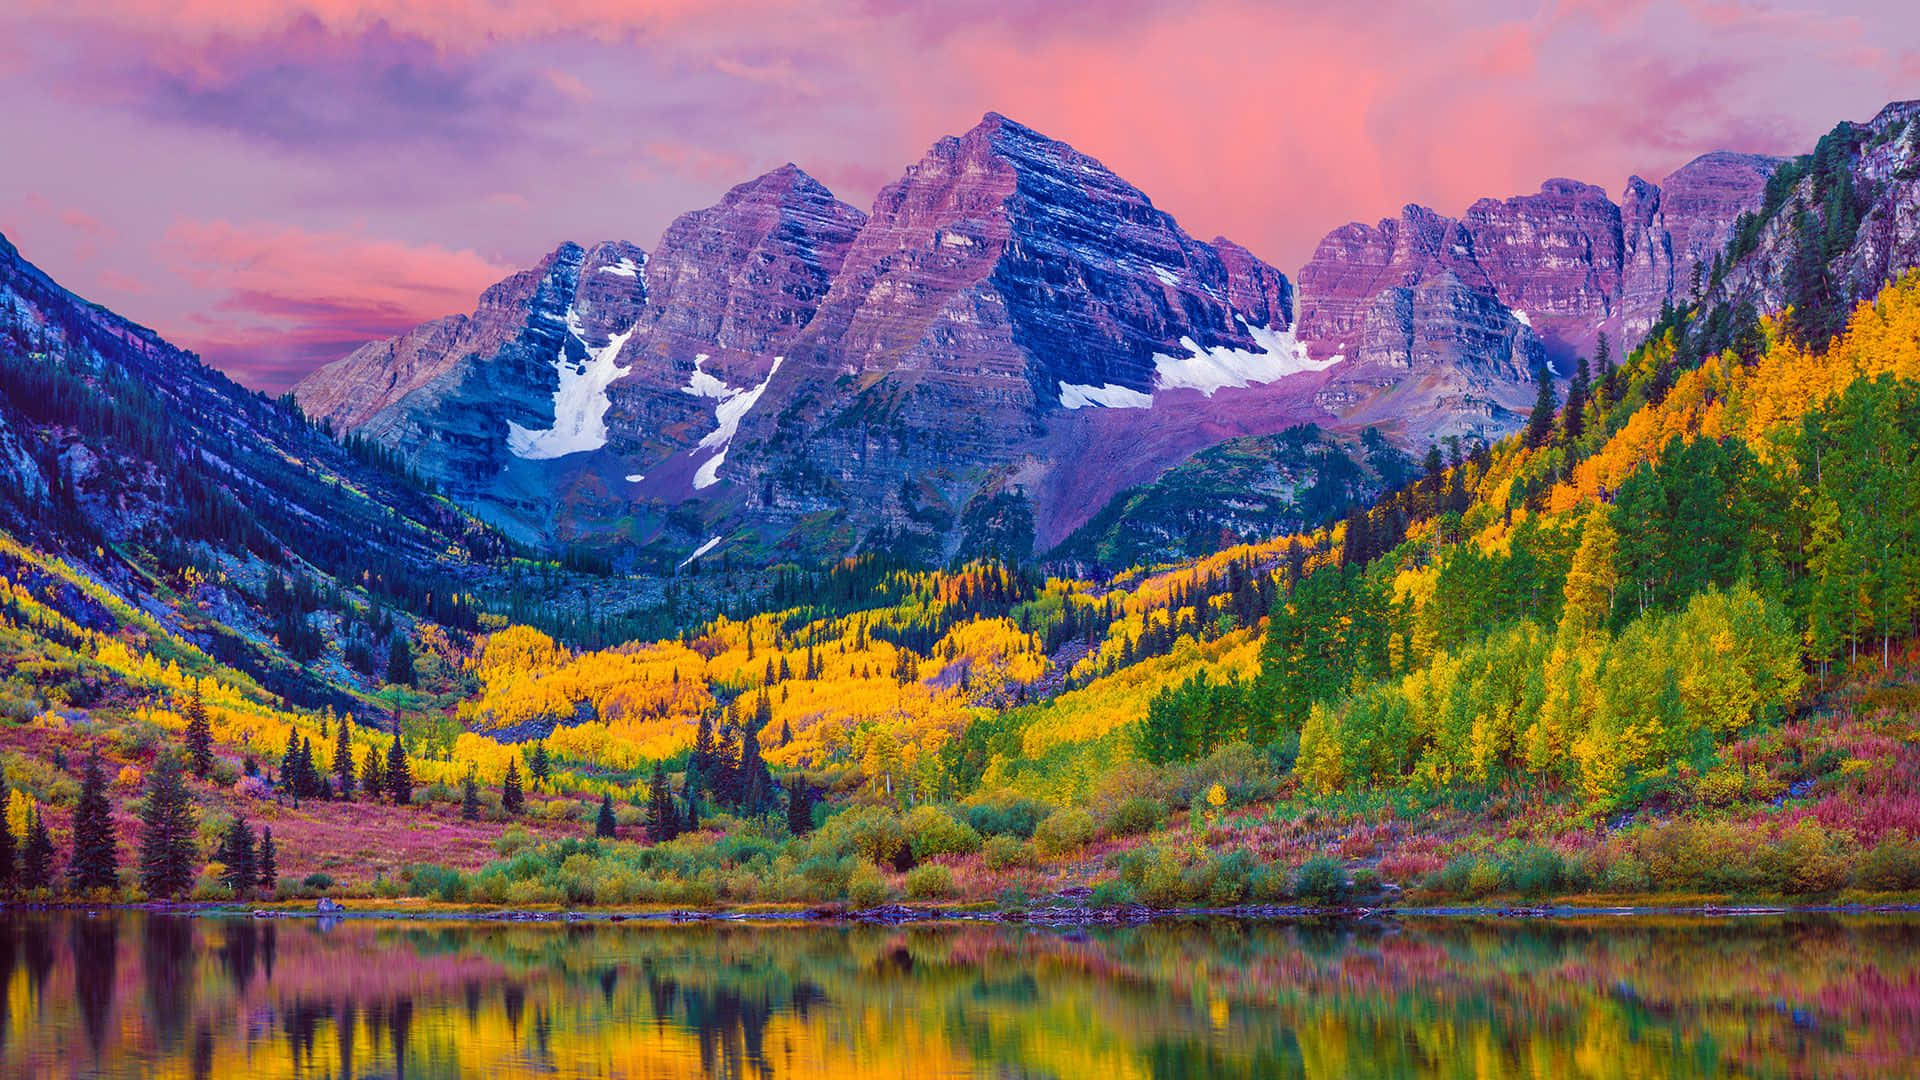 Stunning Views of the Rocky Mountains in Aspen, Colorado